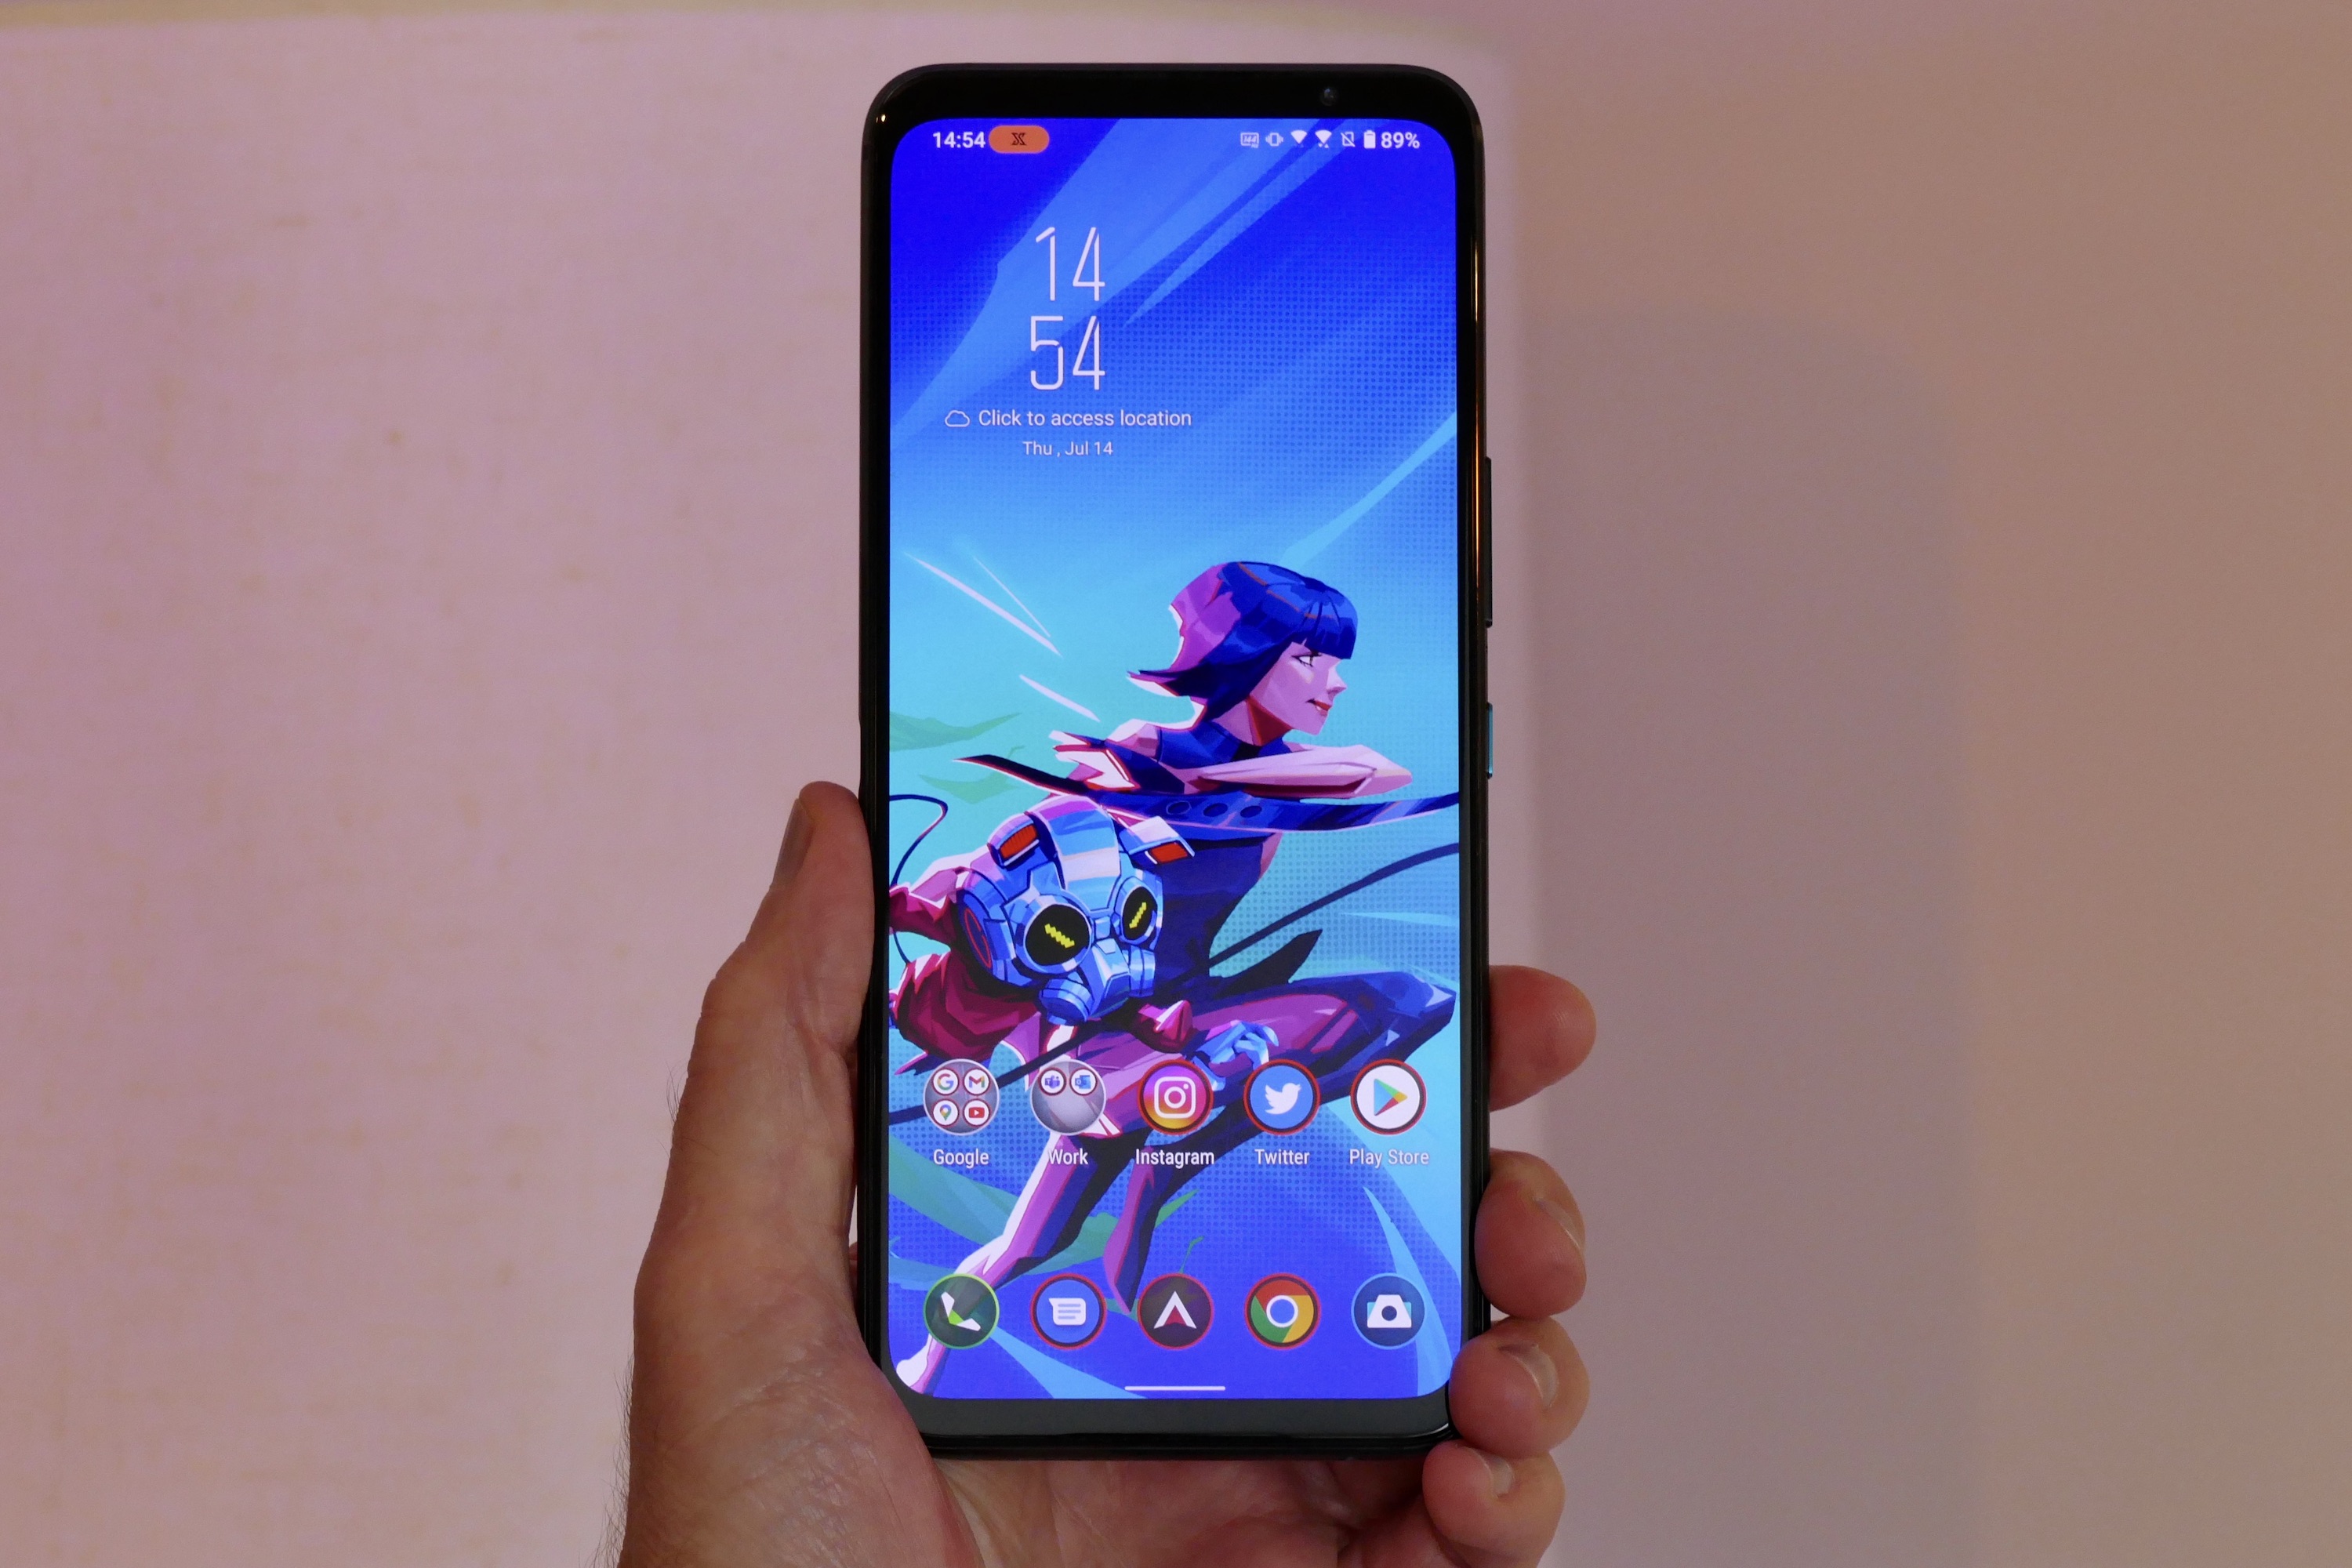 Asus ROG Phone review: The best way to play games on Android - CNET